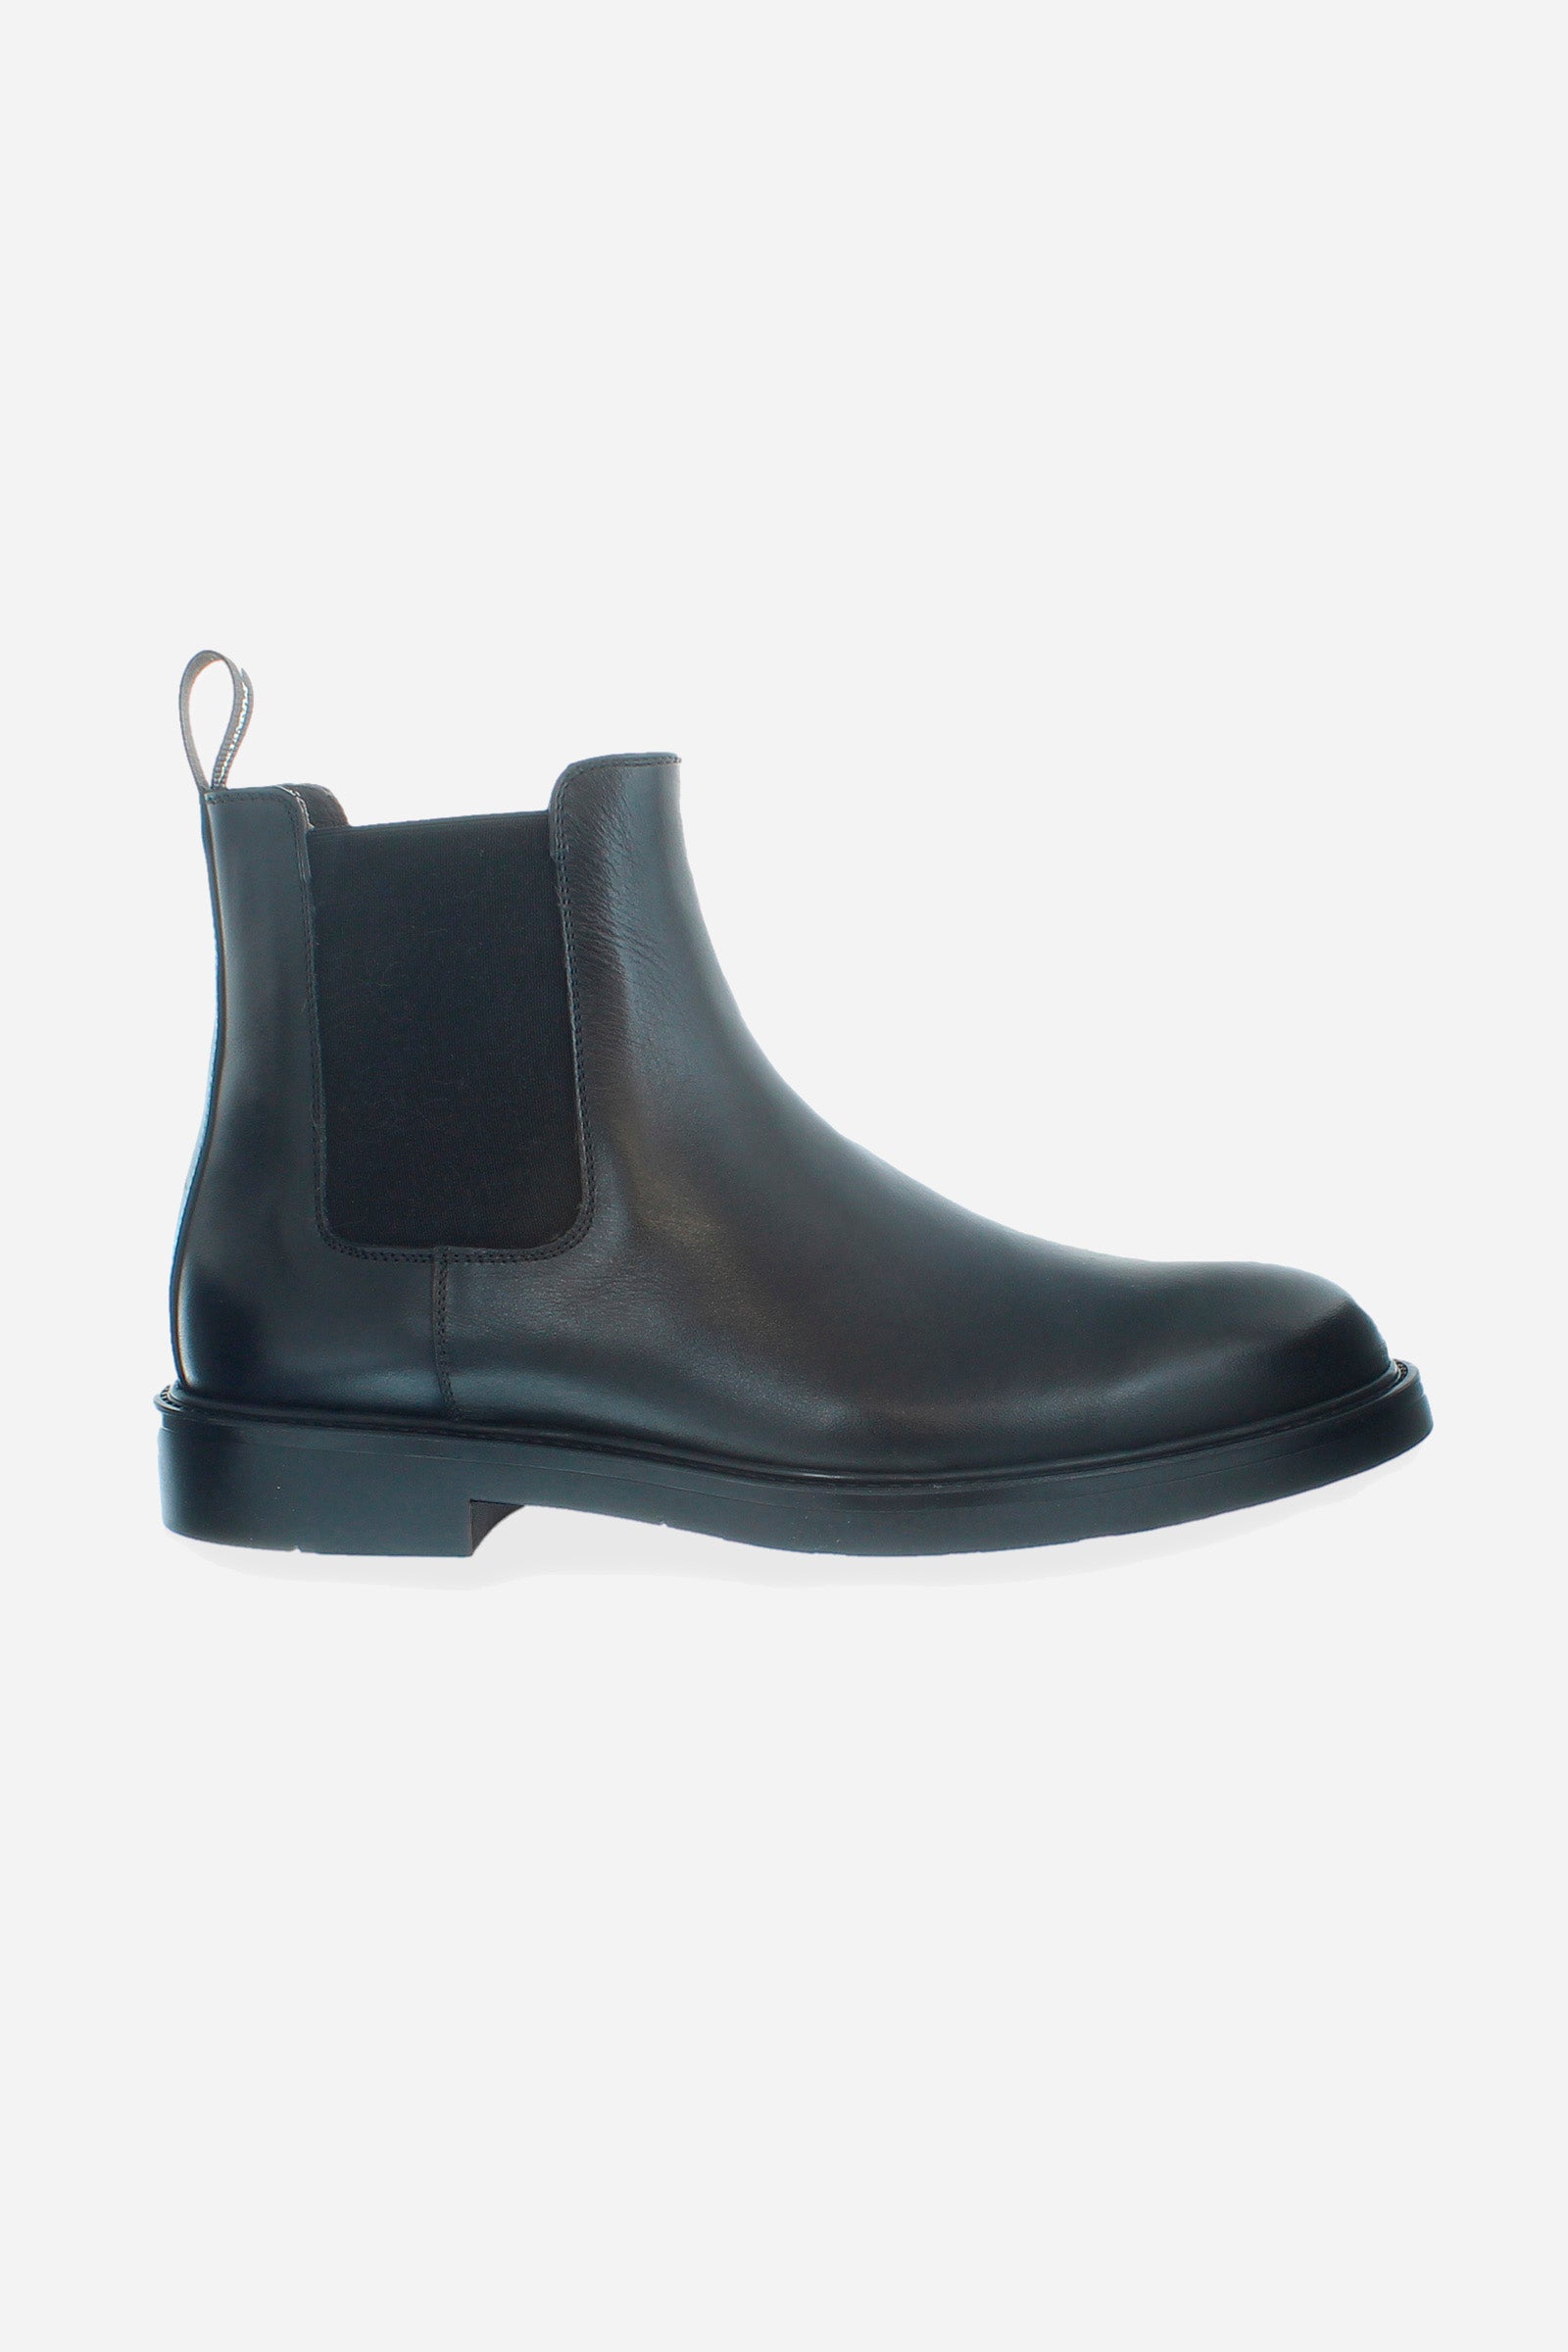 Men’s ankle boot in buttero leather